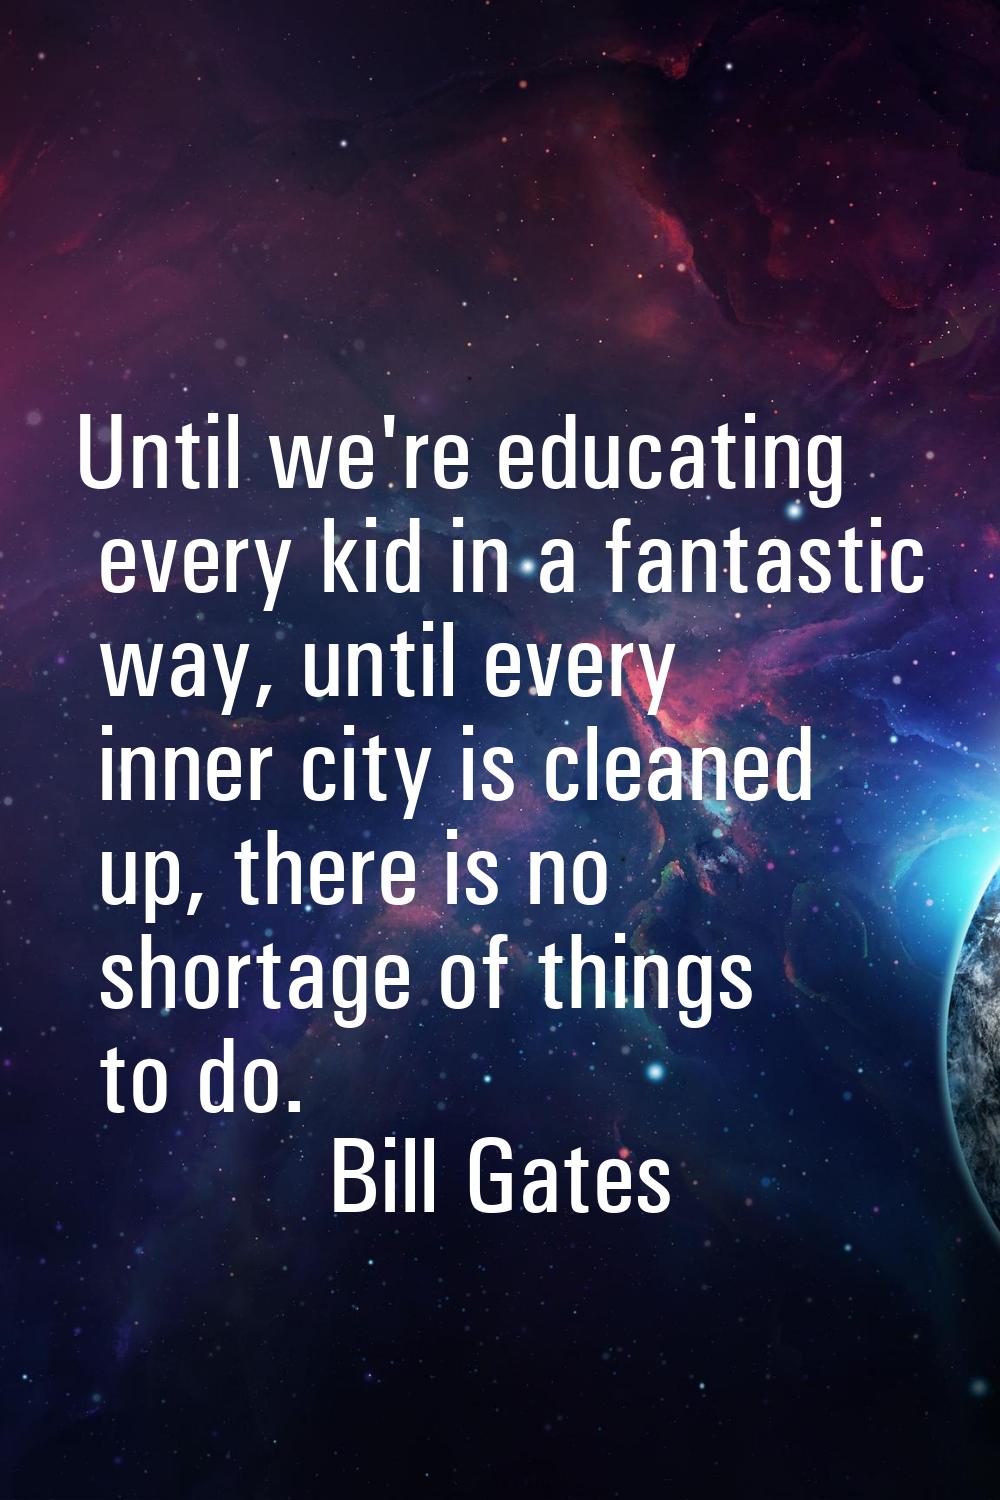 Until we're educating every kid in a fantastic way, until every inner city is cleaned up, there is 